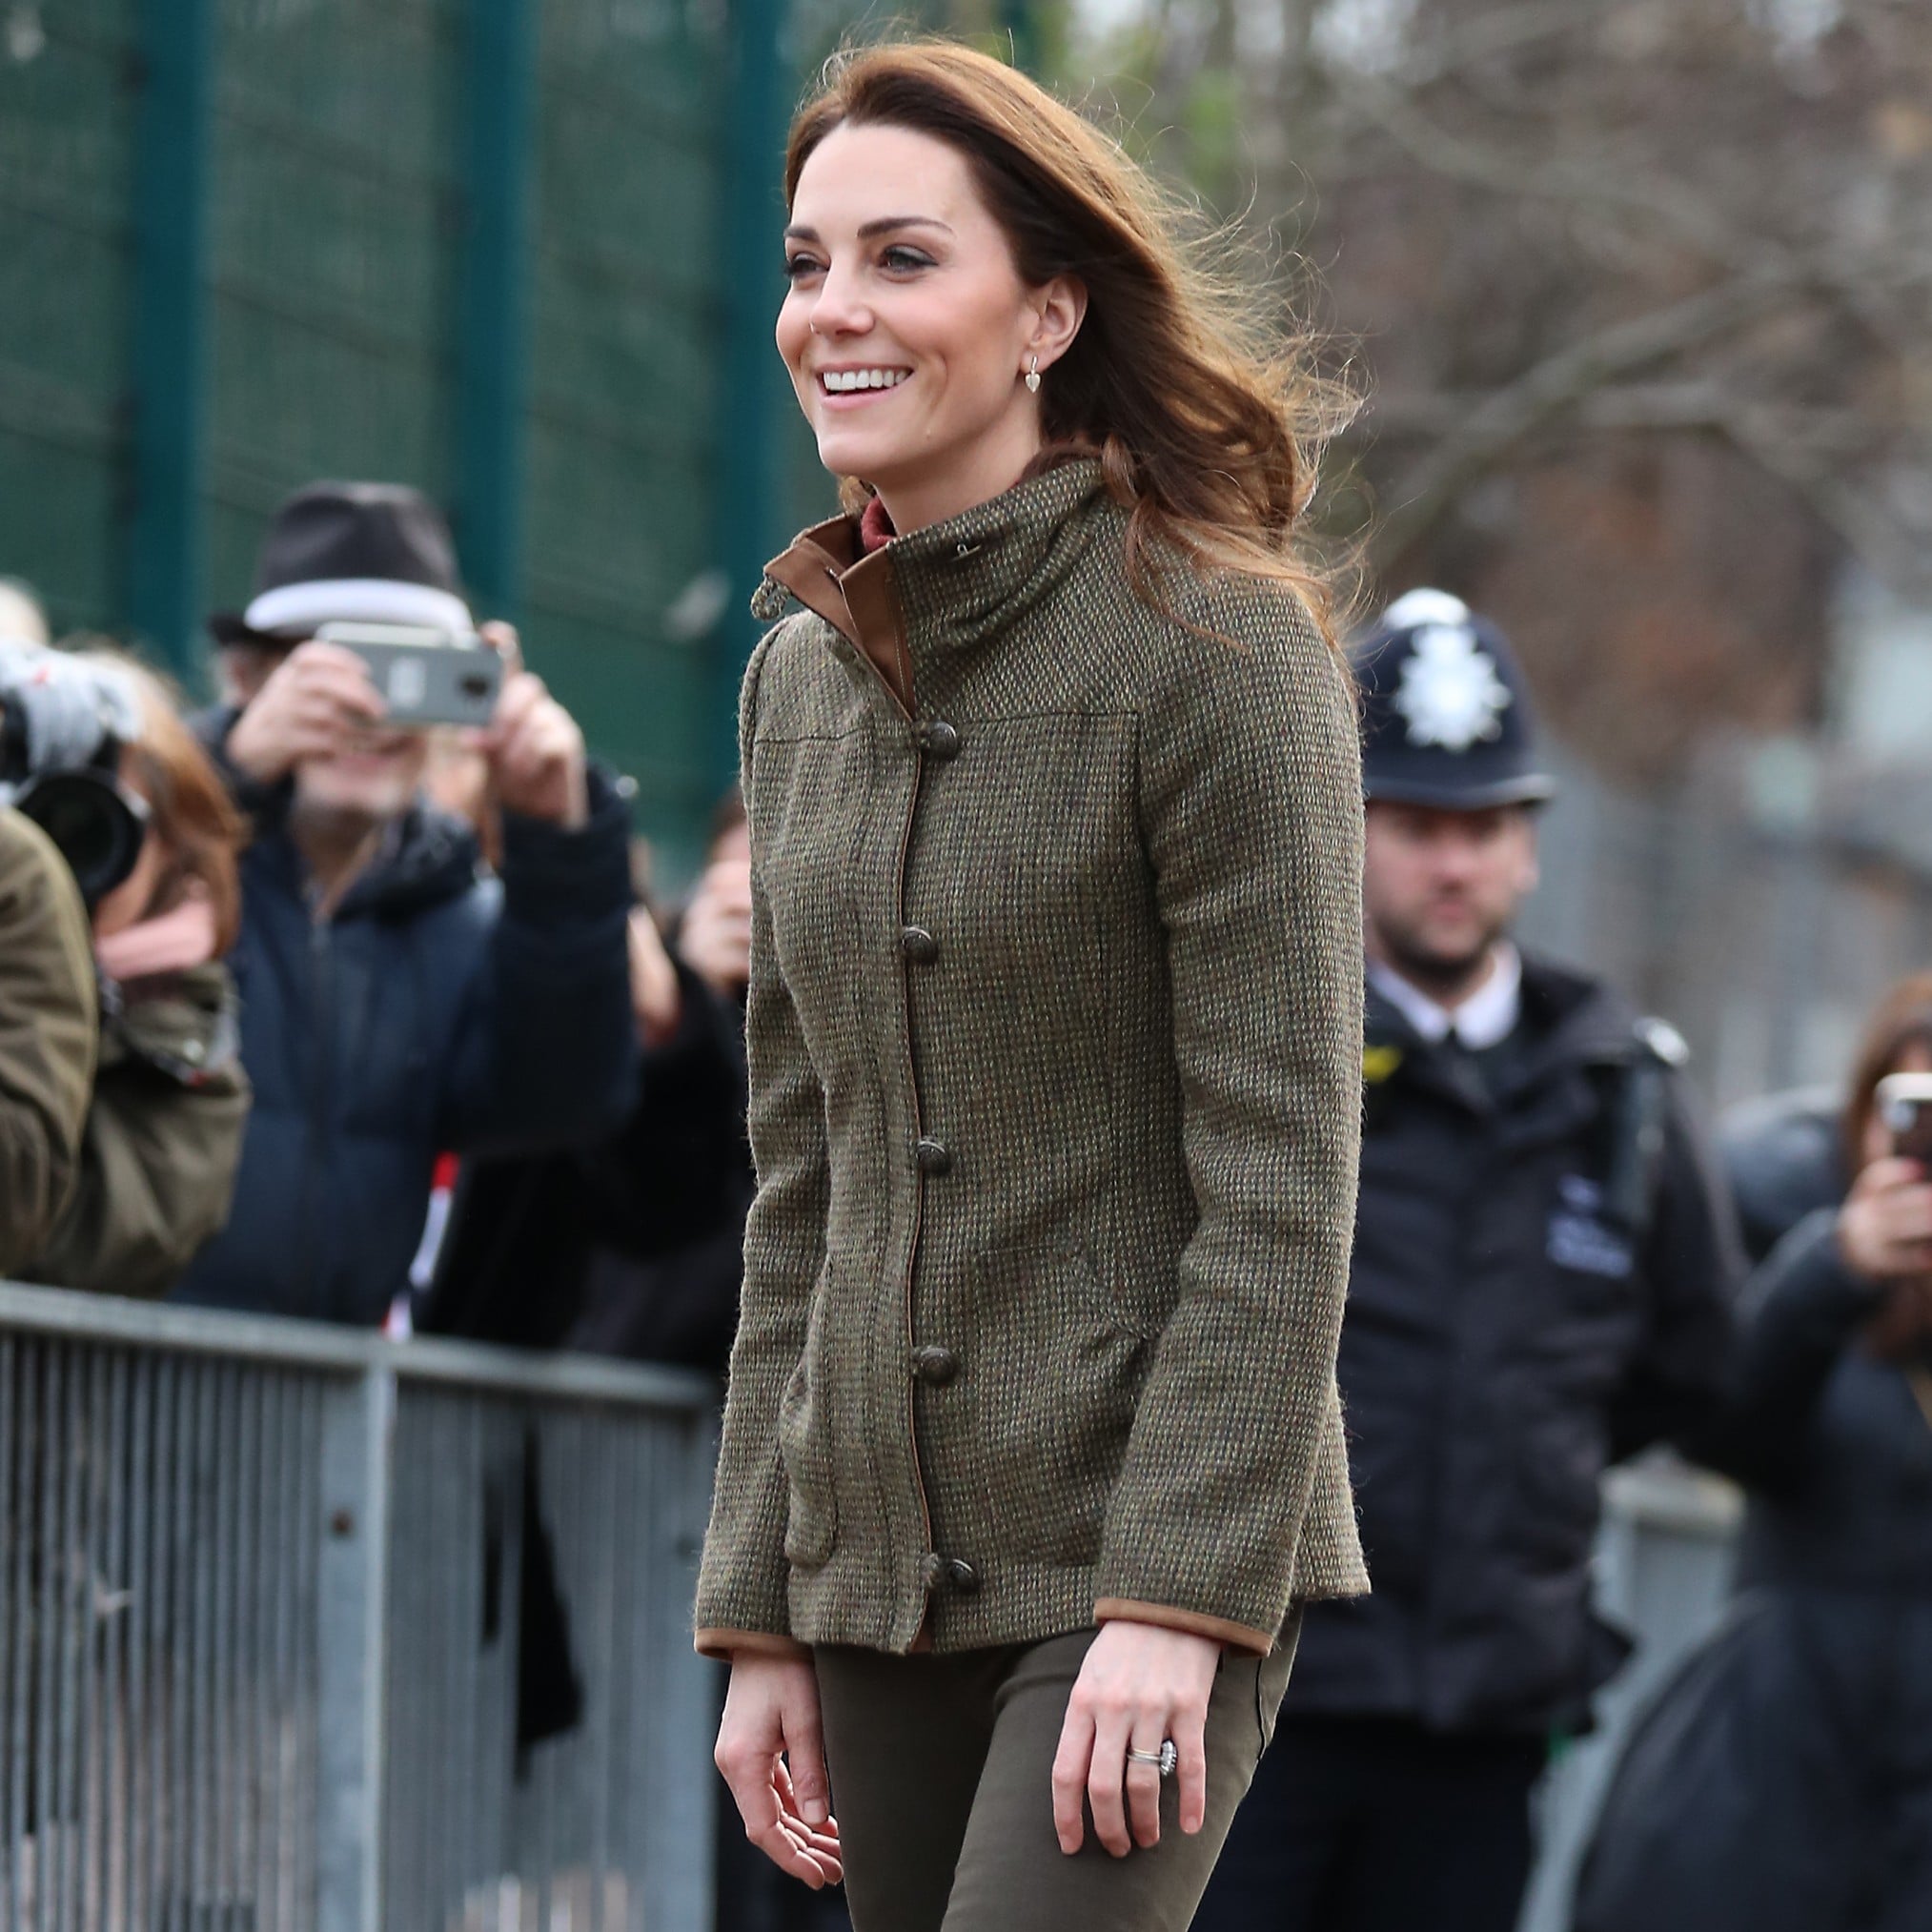 see by chloe hiking boots kate middleton